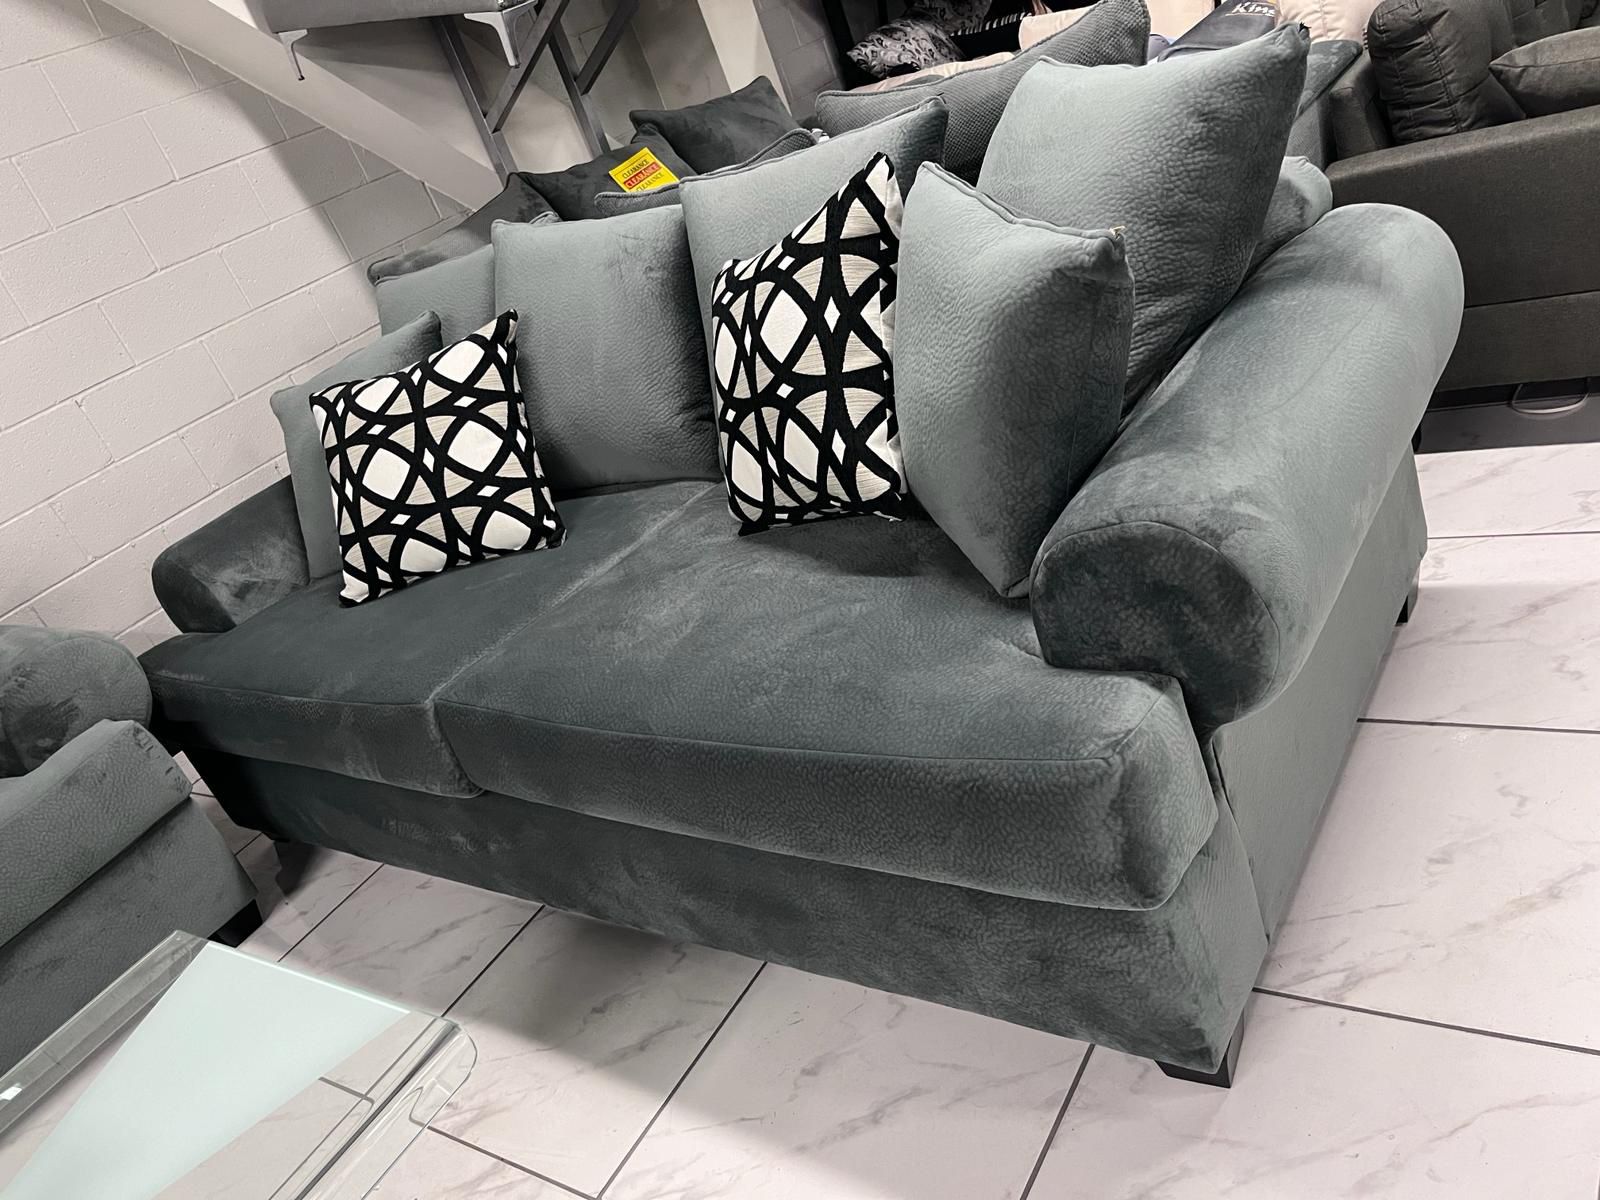 Oversize Sofa Set 🔥 Take It Home With Only $50 Down 